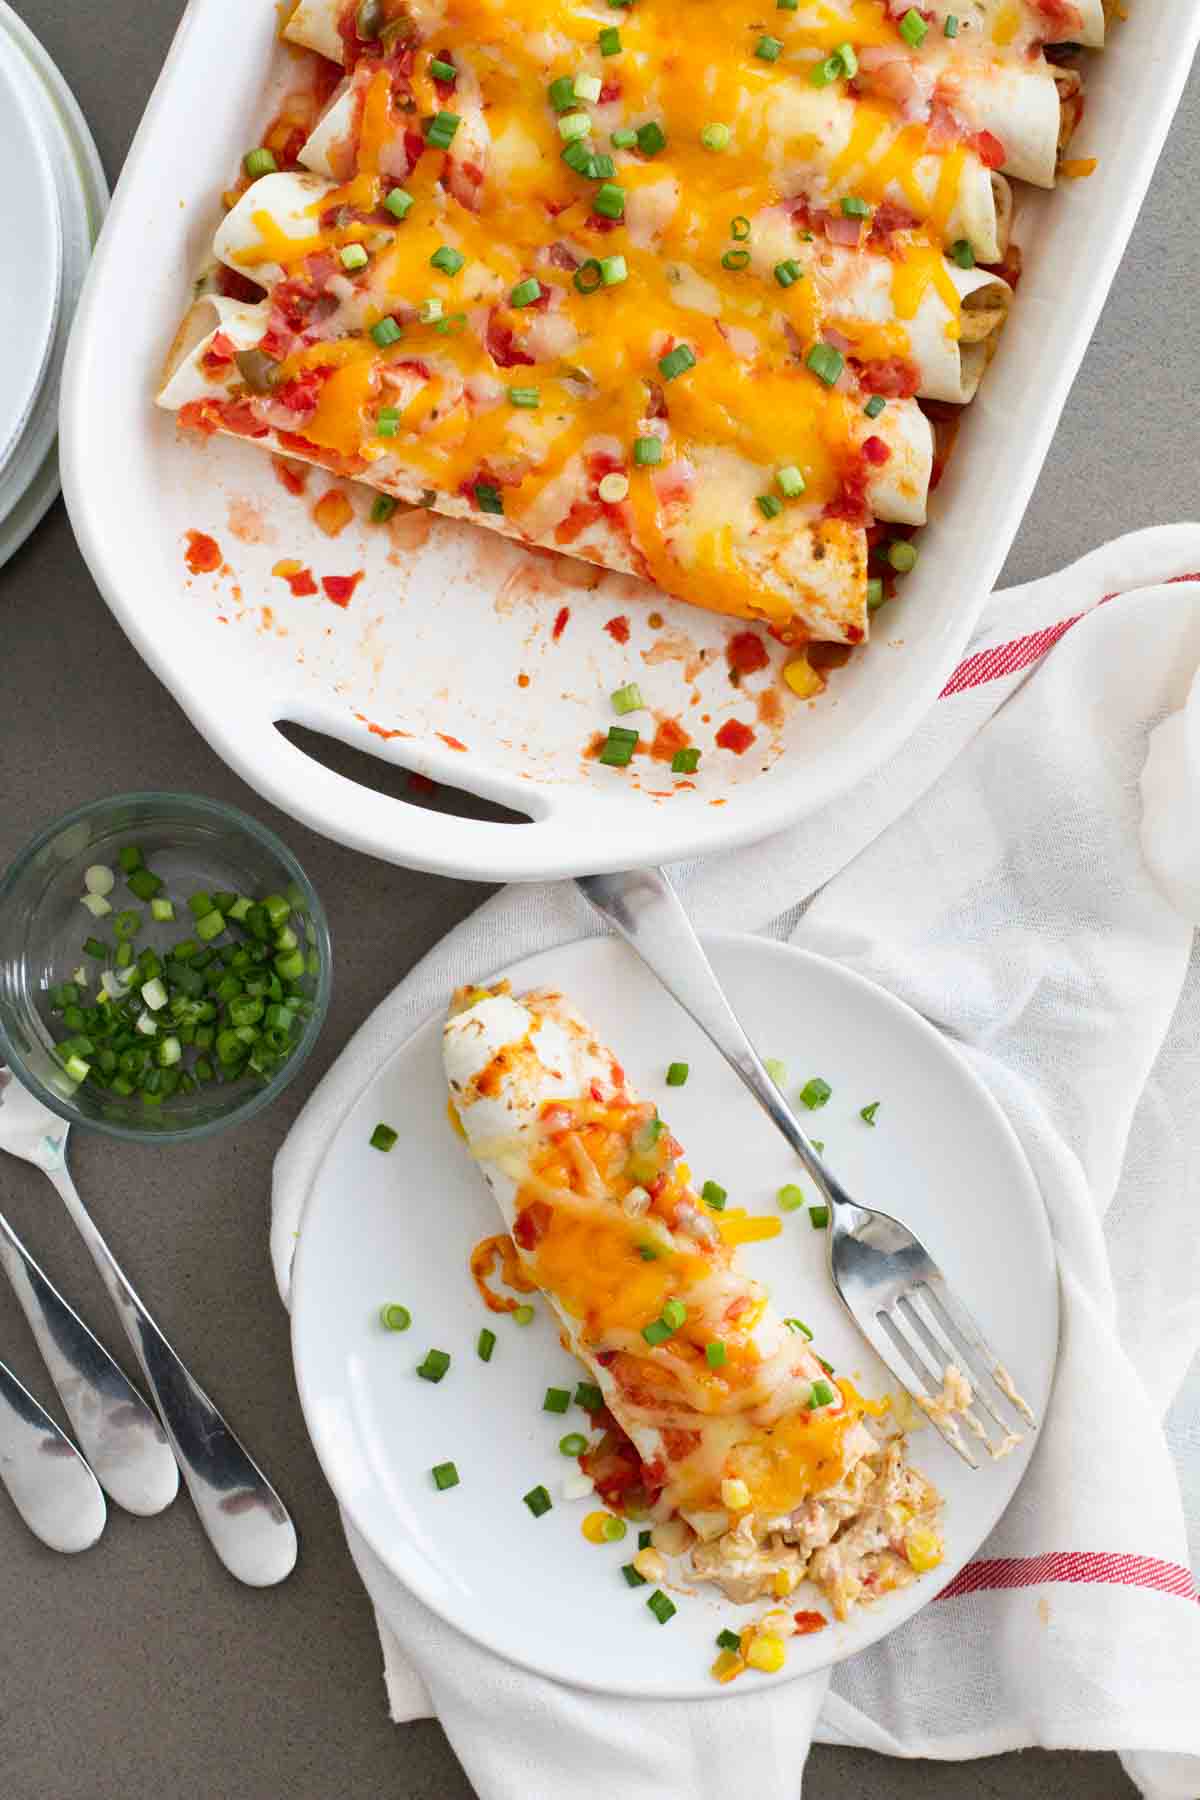 Cream Cheese Chicken Enchiladas on a plate with a dish of enchiladas next to it.